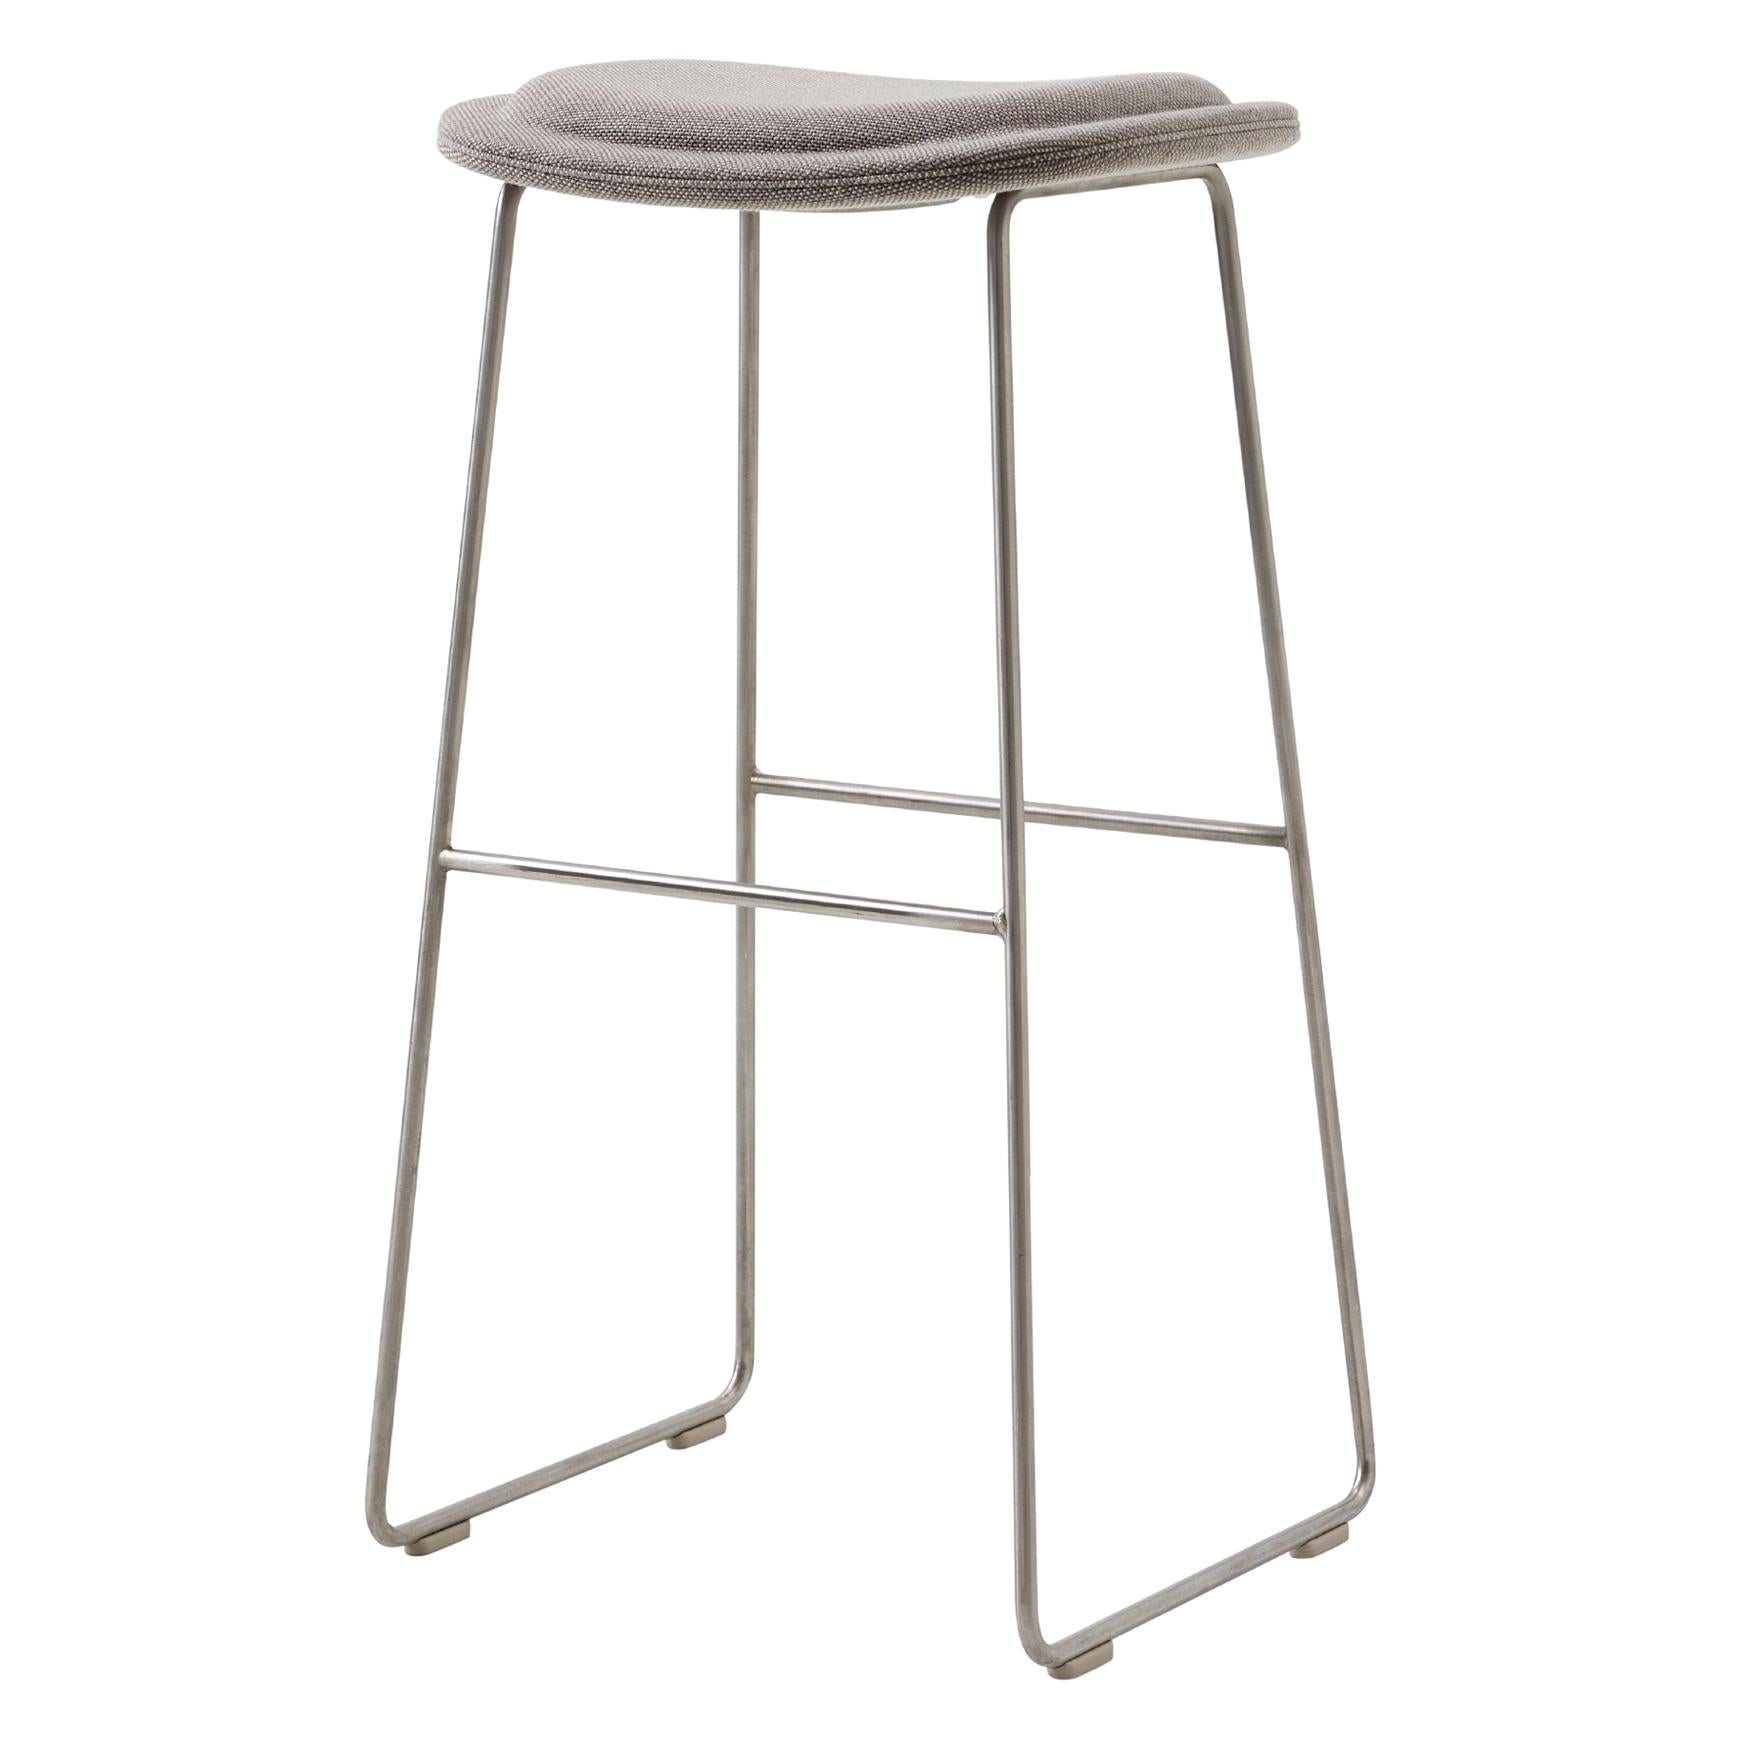 For Sale: Silver (Hallingdal 2 555) Jasper Morrison Large Hi Pad Stool in Fabric or Leather Upholstery by Cappellini